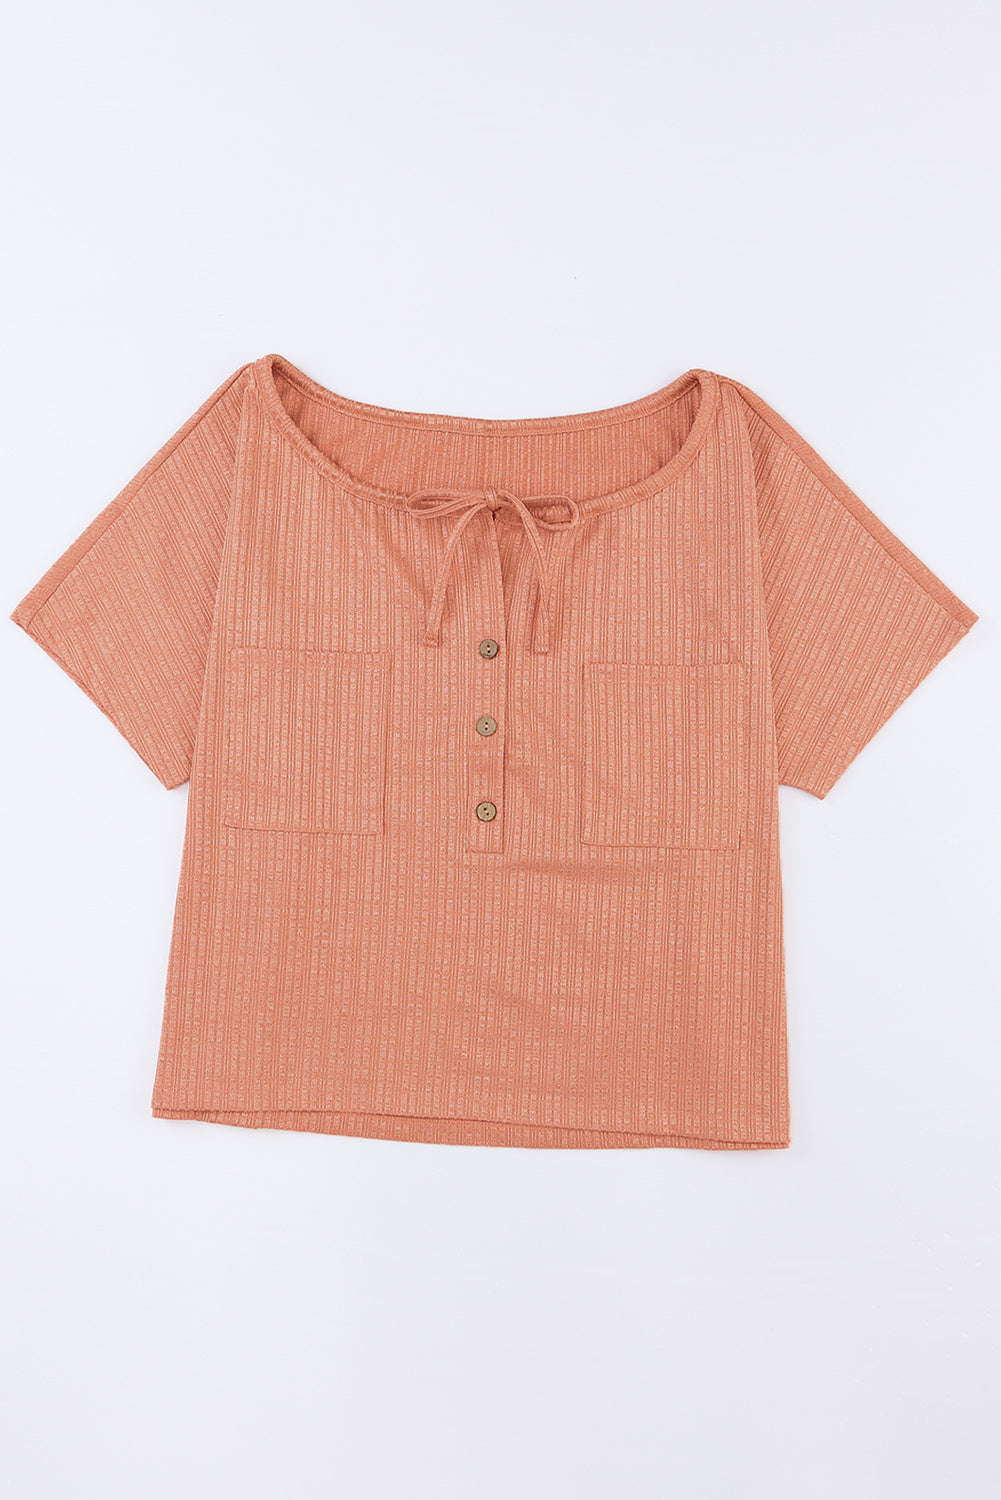 Tied Round Neck Buttoned Top - Women’s Clothing & Accessories - Shirts & Tops - 5 - 2024